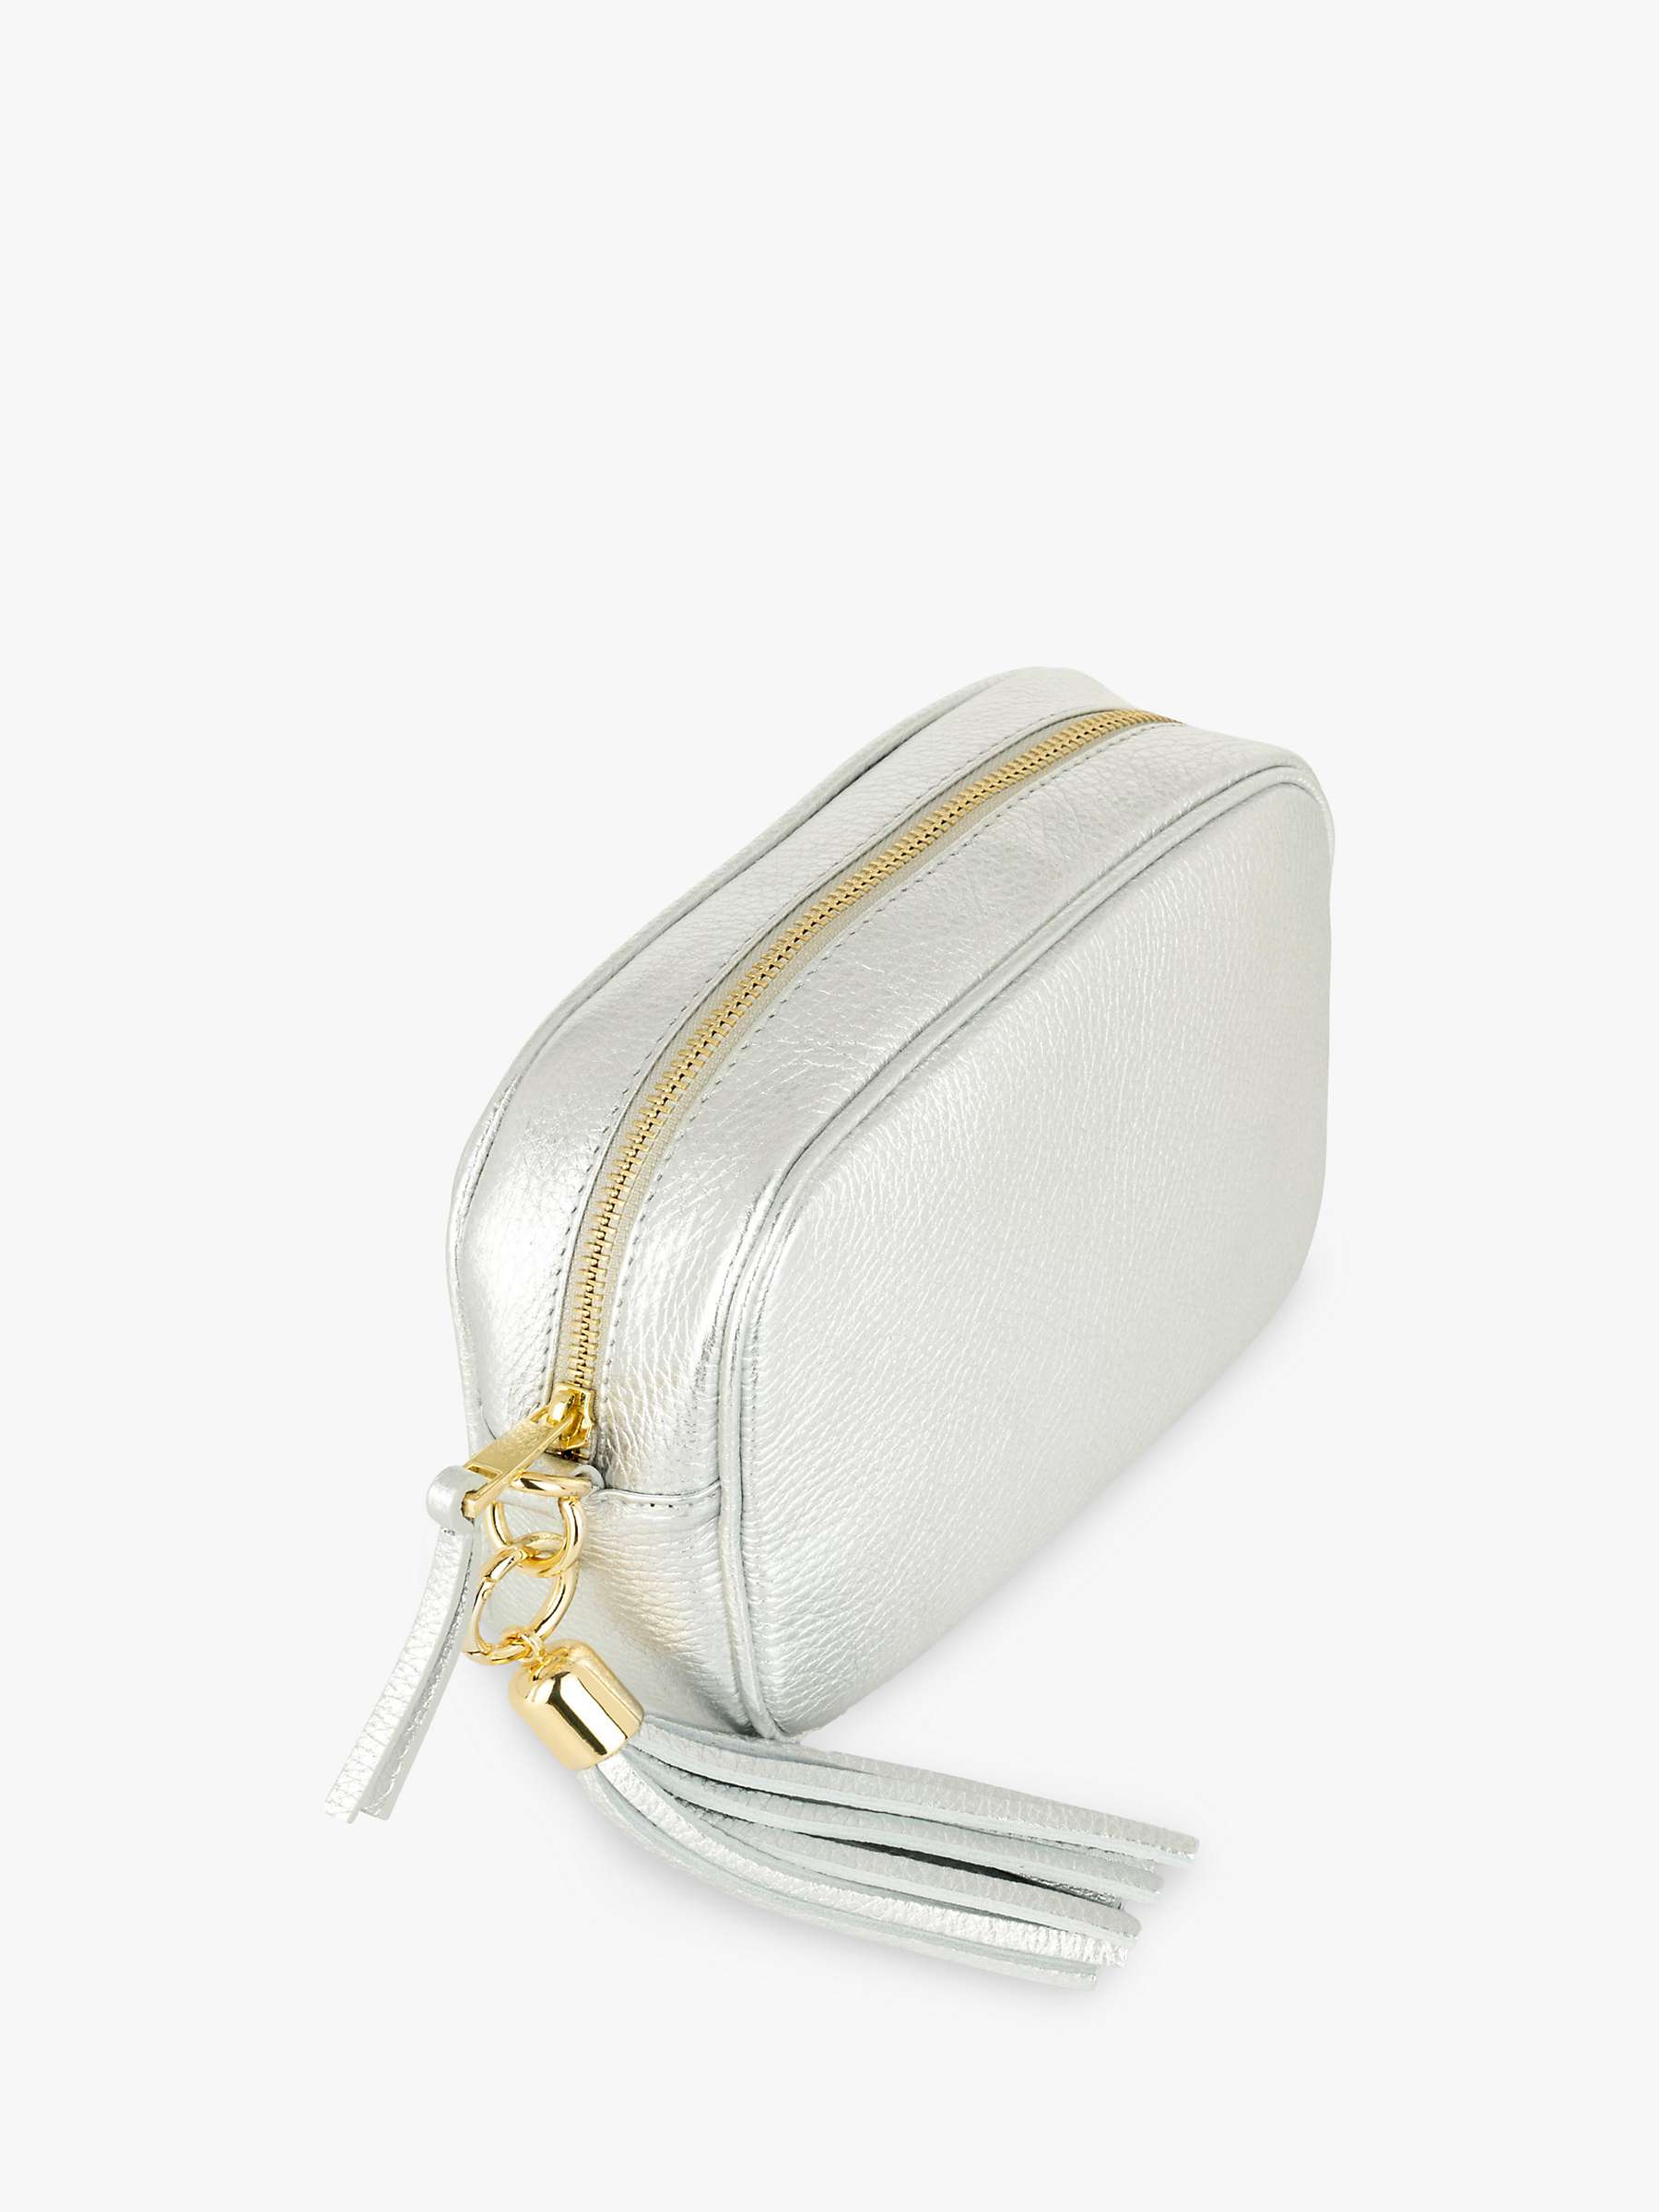 Buy Apatchy Chevron Strap Leather Cross Body Bag Online at johnlewis.com